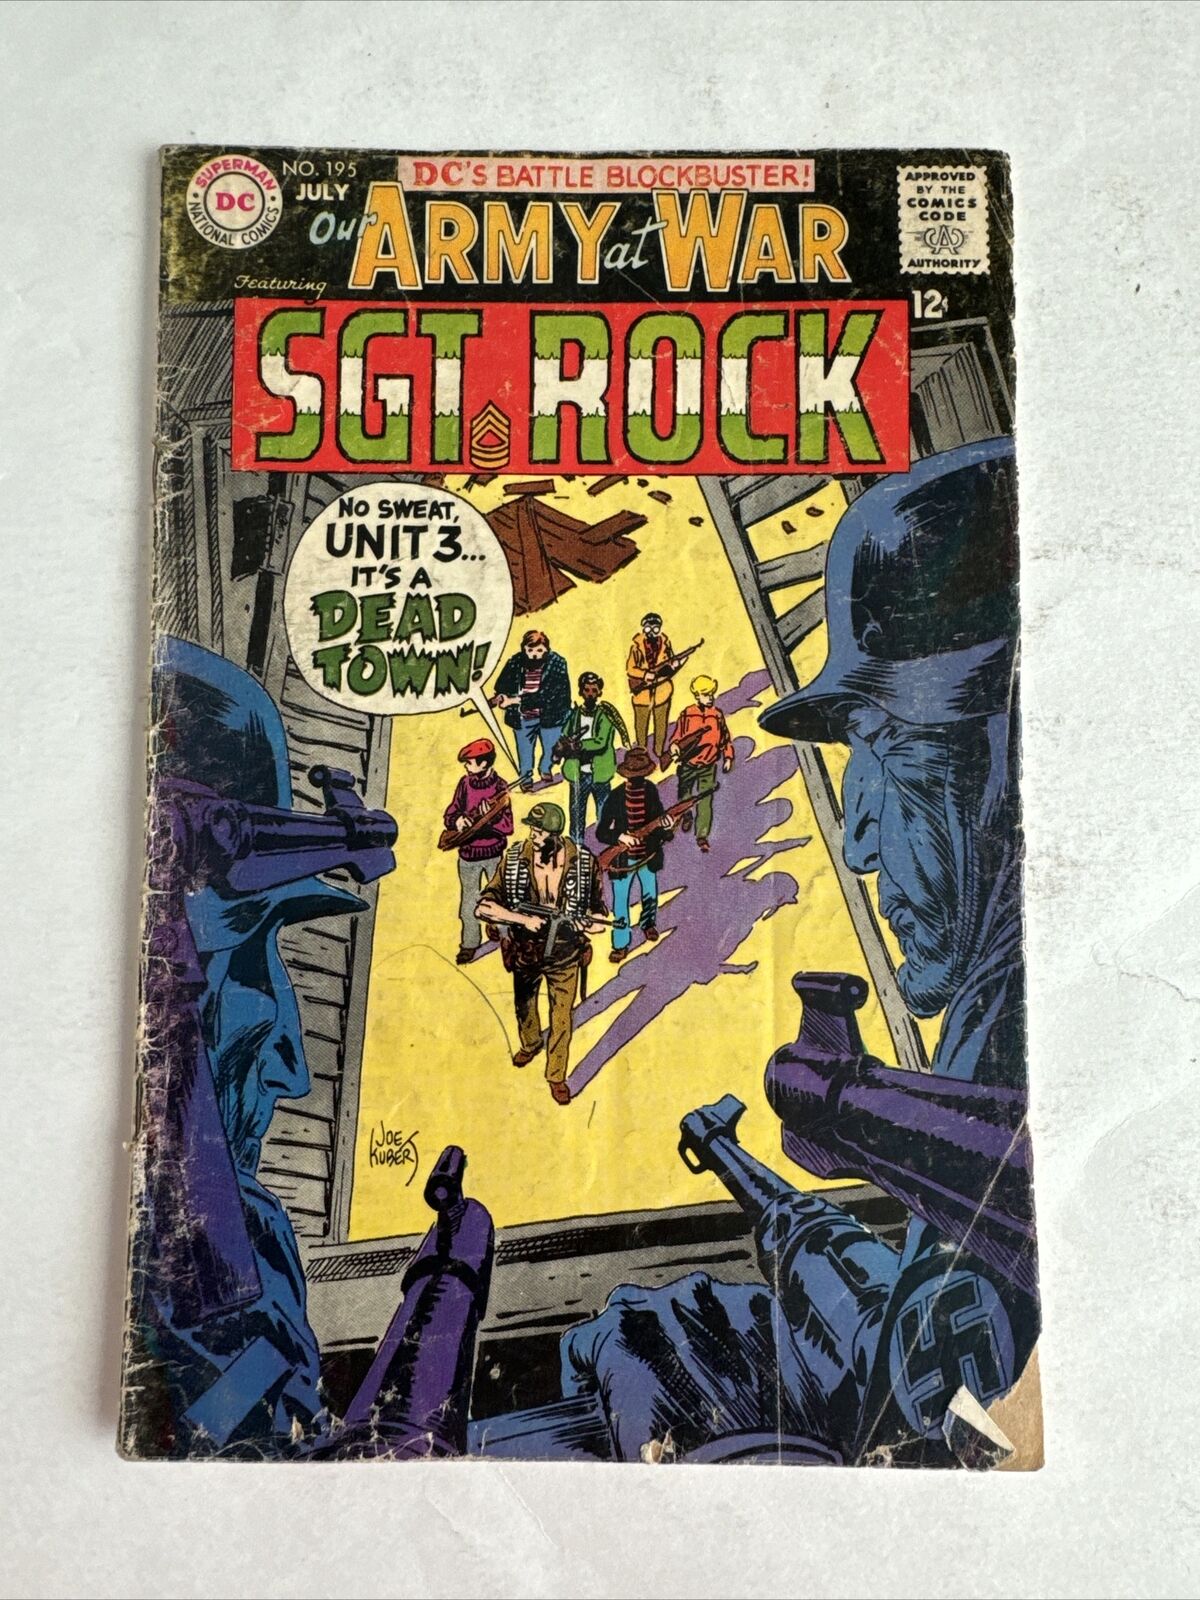 Our Army at War #195 (1968, DC Comics)